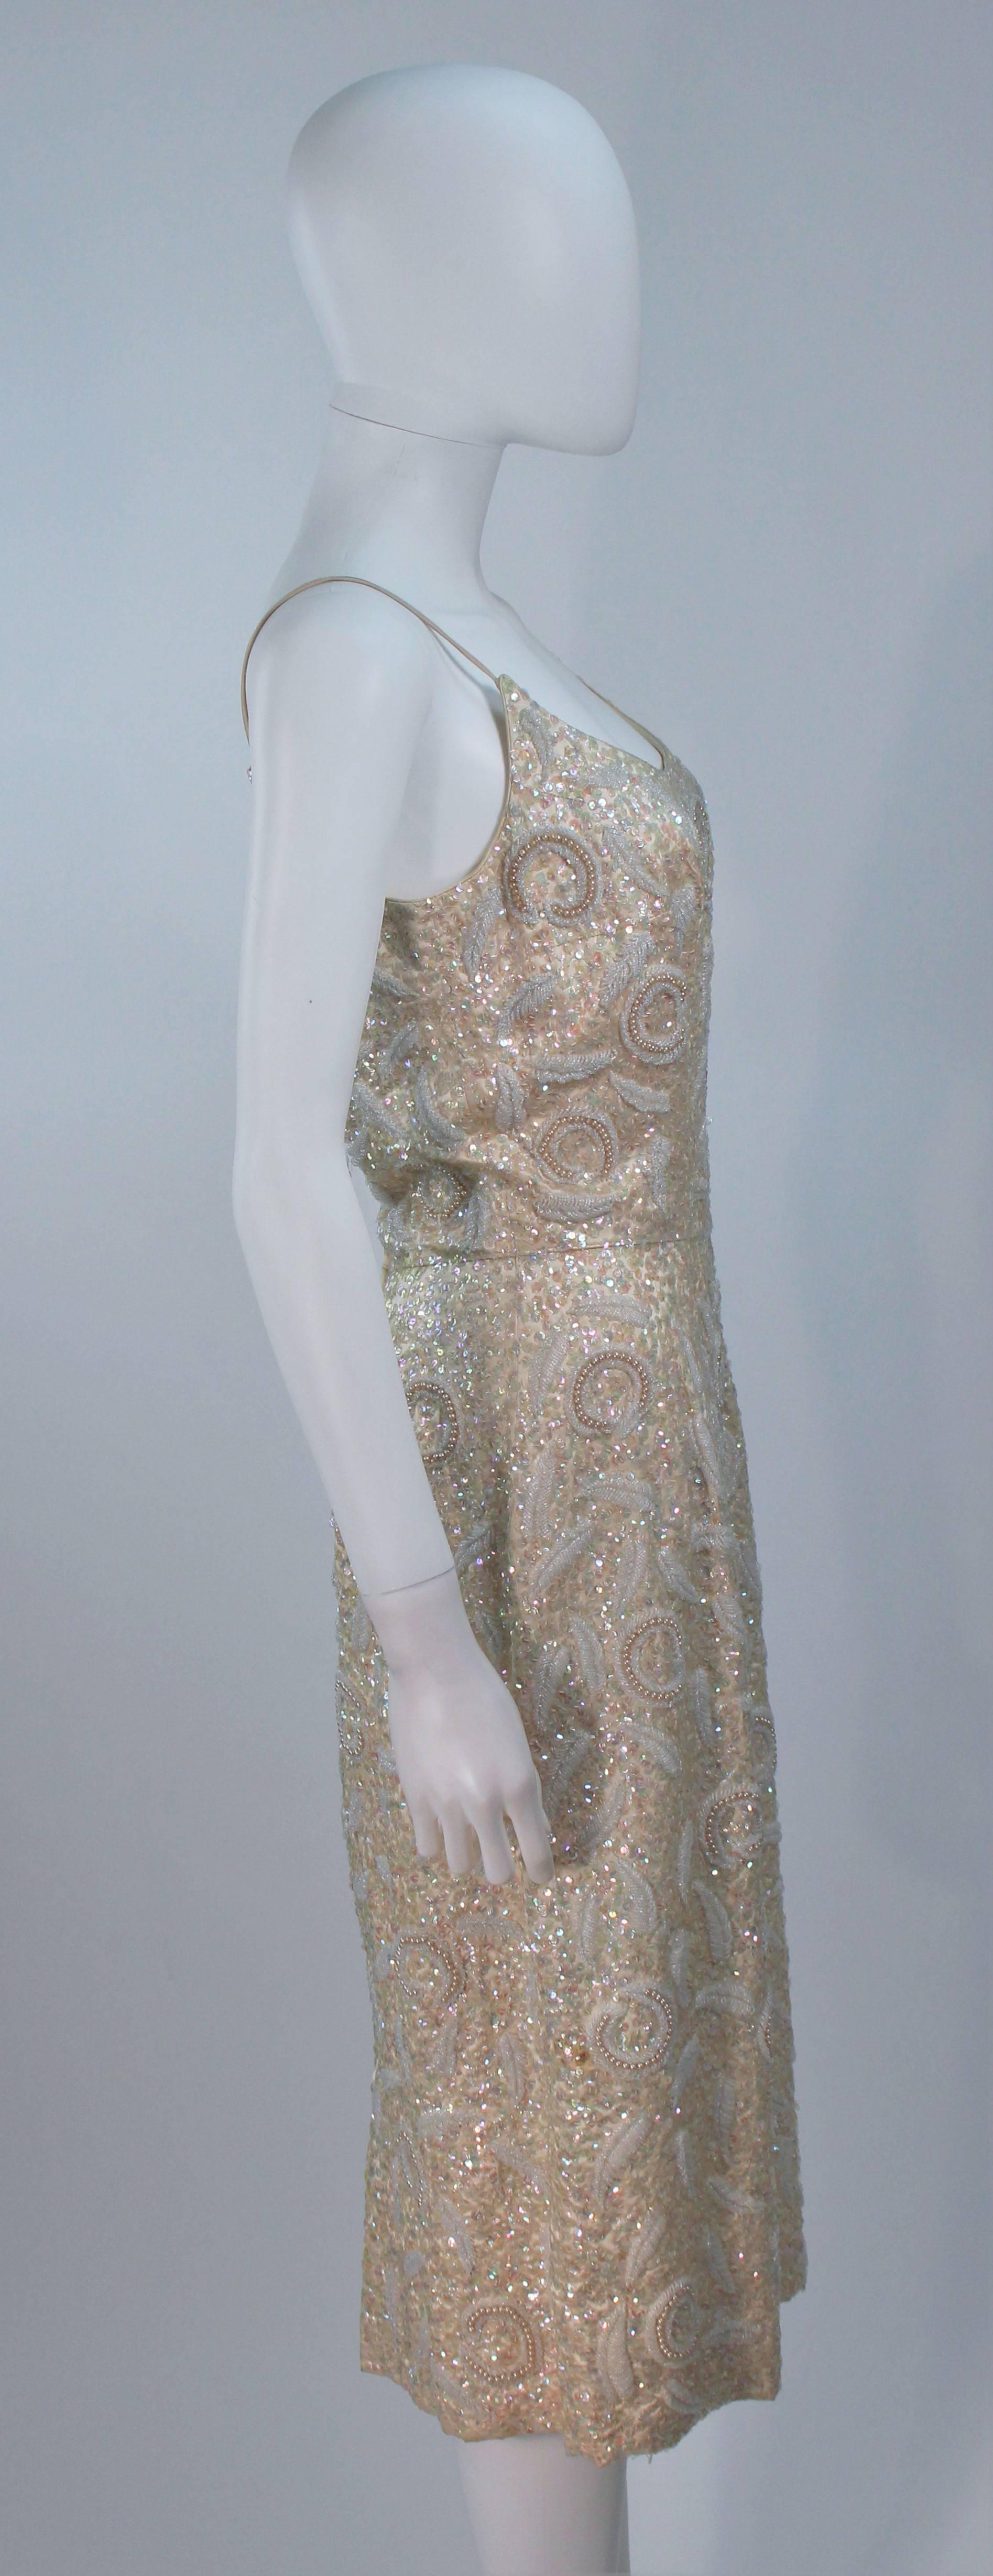 IMPERIAL HOUSE Silk Off White Iridescent Sequined Cocktail Dress Size 6 In Excellent Condition For Sale In Los Angeles, CA